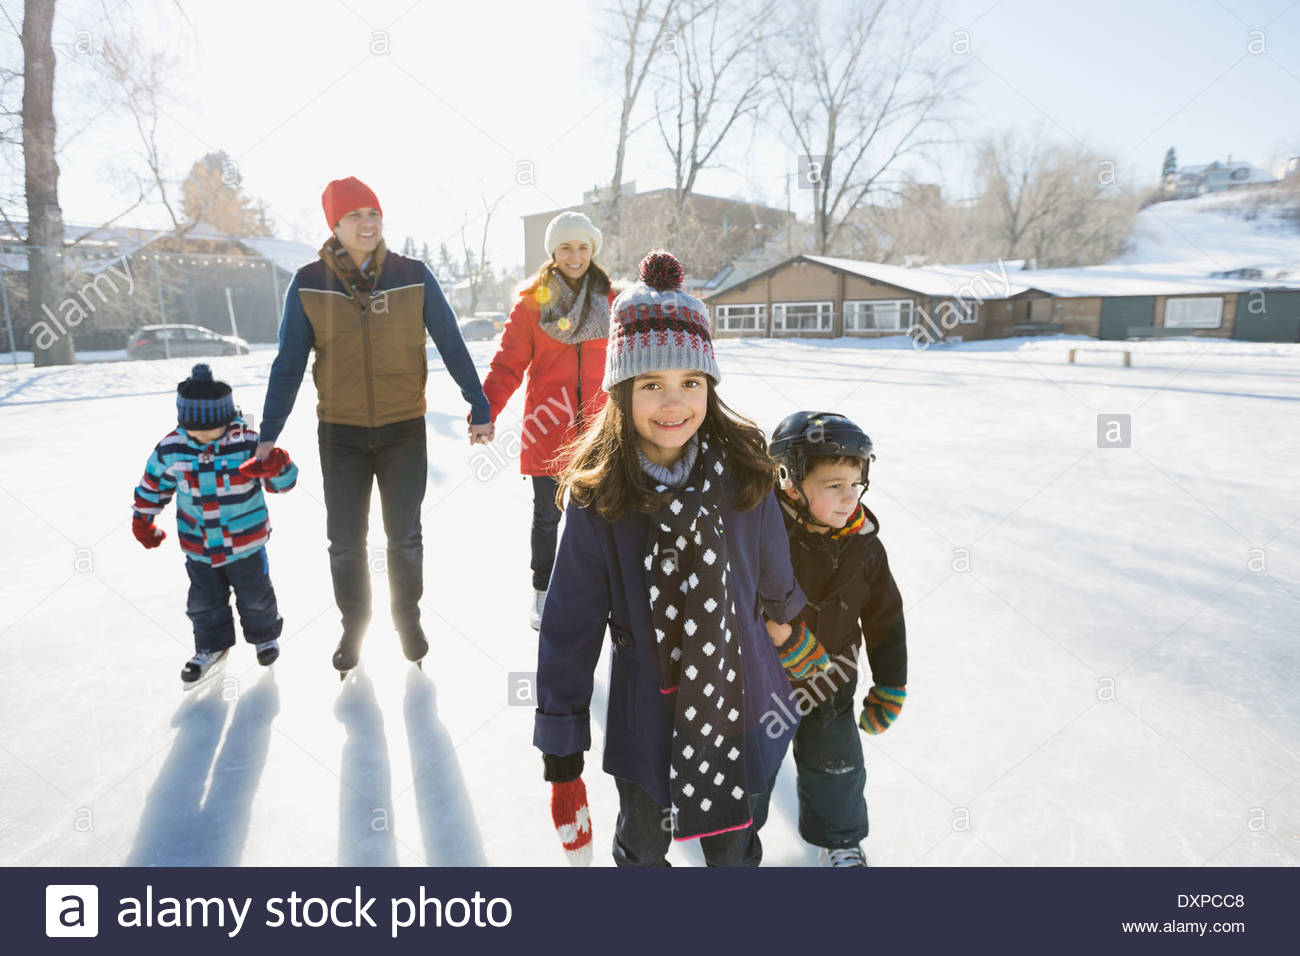 Family ice-skating on outdoor rink together Stock Photo